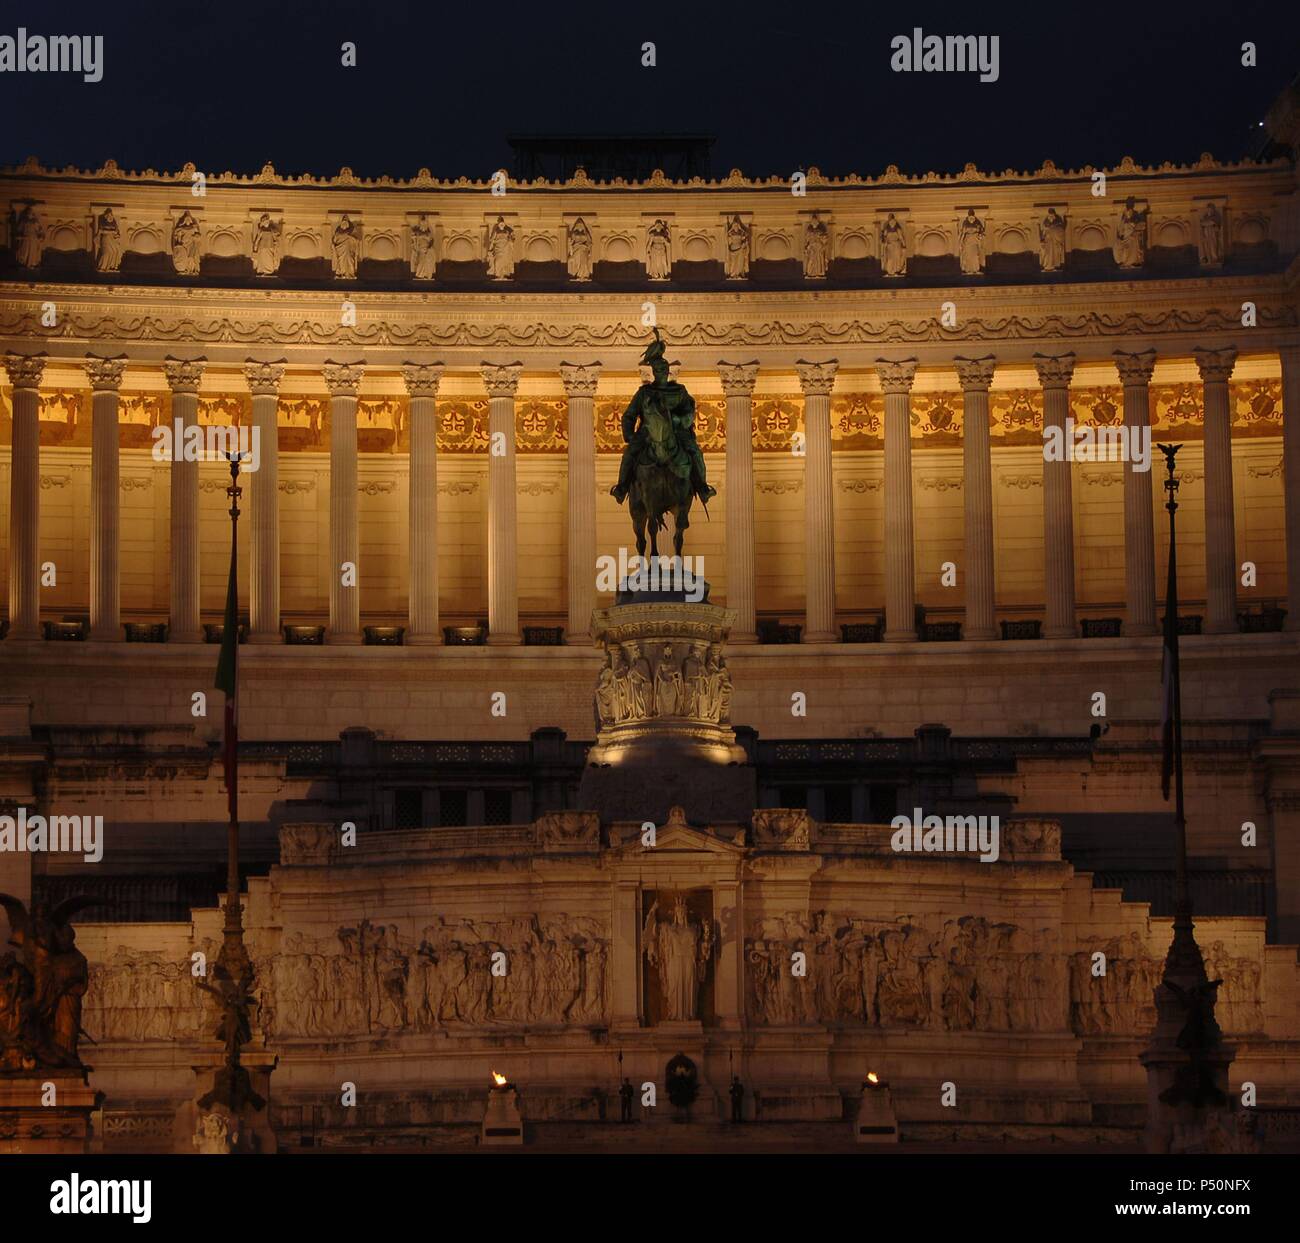 Italy. Rome. National Monument of Victor Emmanuel II. Night view. Built between 1885 and 1911 to celebrate the advent of Italian unification in 1870 and the rise to the throne of the first king of Italy. Venice Square. Stock Photo